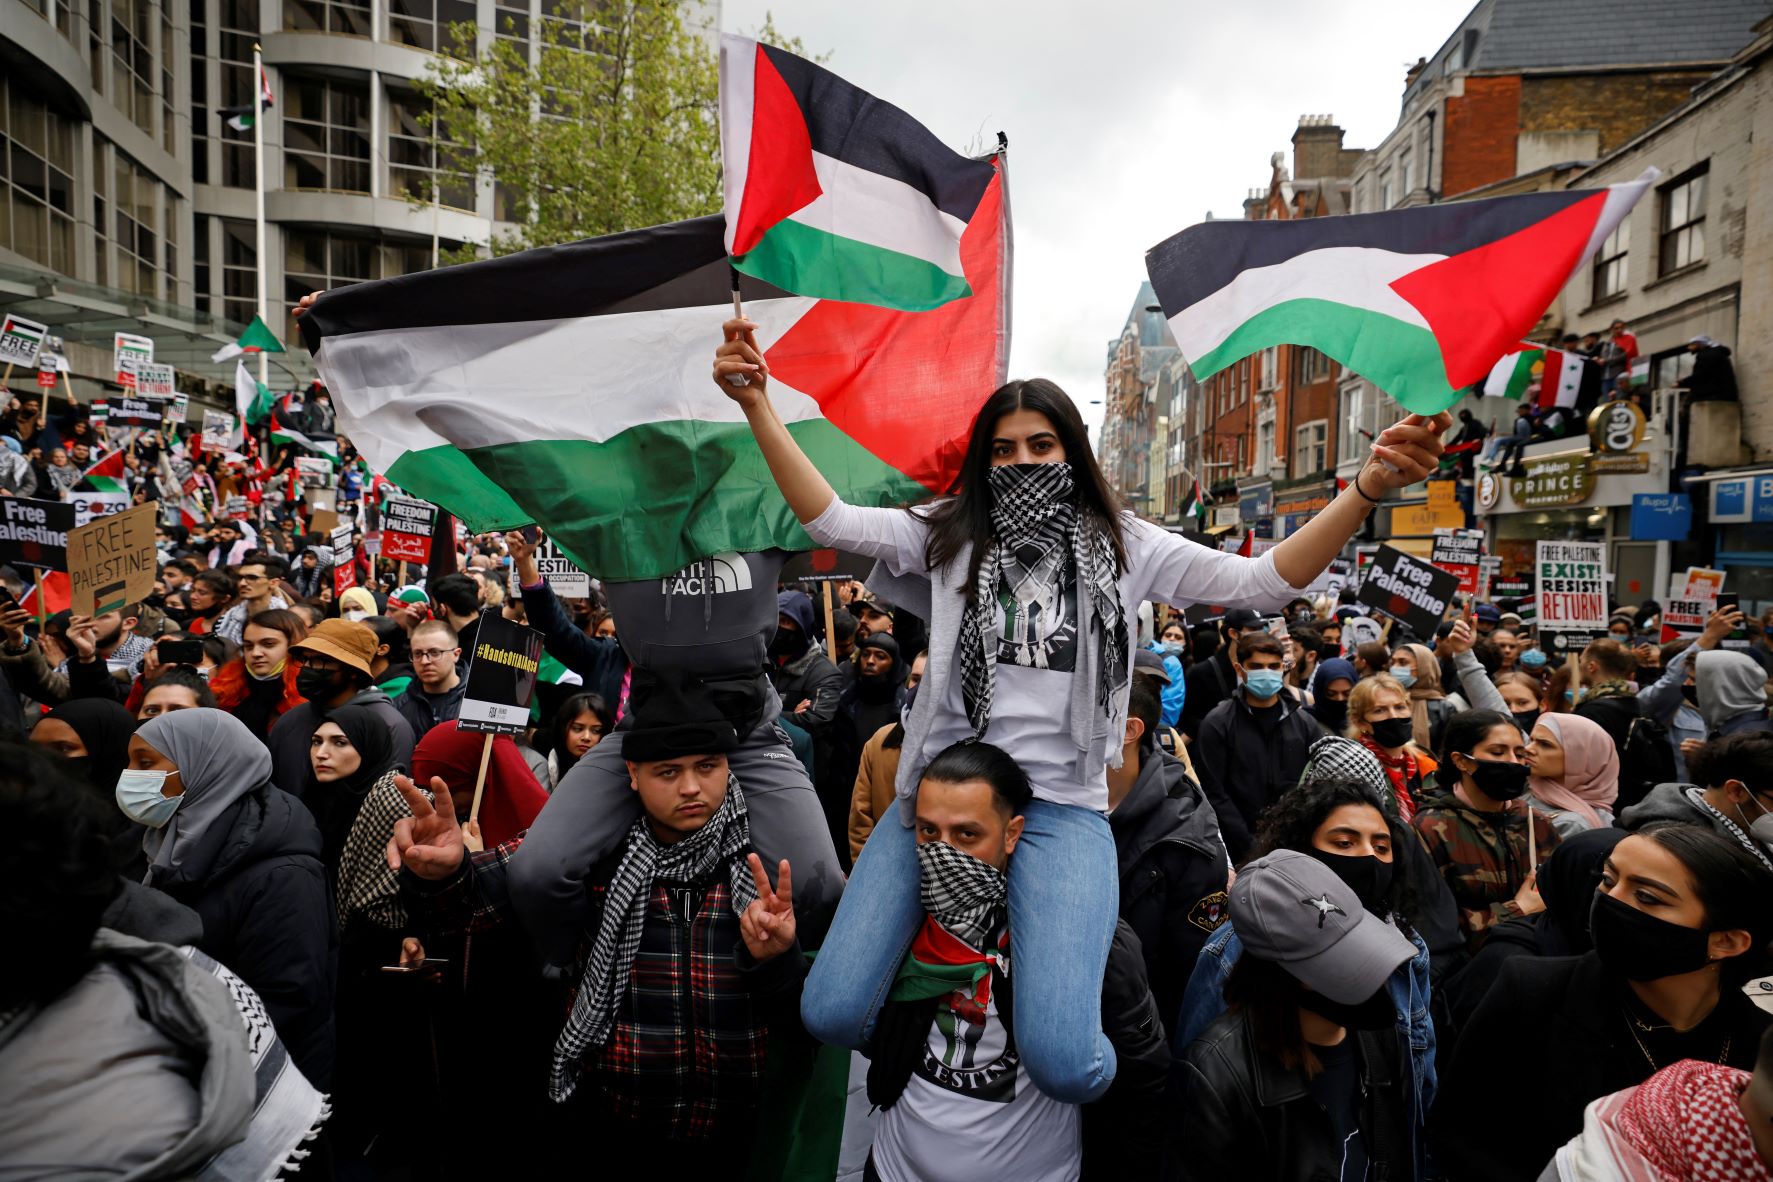 Pro-Palestinian activists and supporters wave flags and carry placards during a demonstration in support of the Palestinian cause outside the Israeli Embassy in central London on May 15, 2021 (AFP)